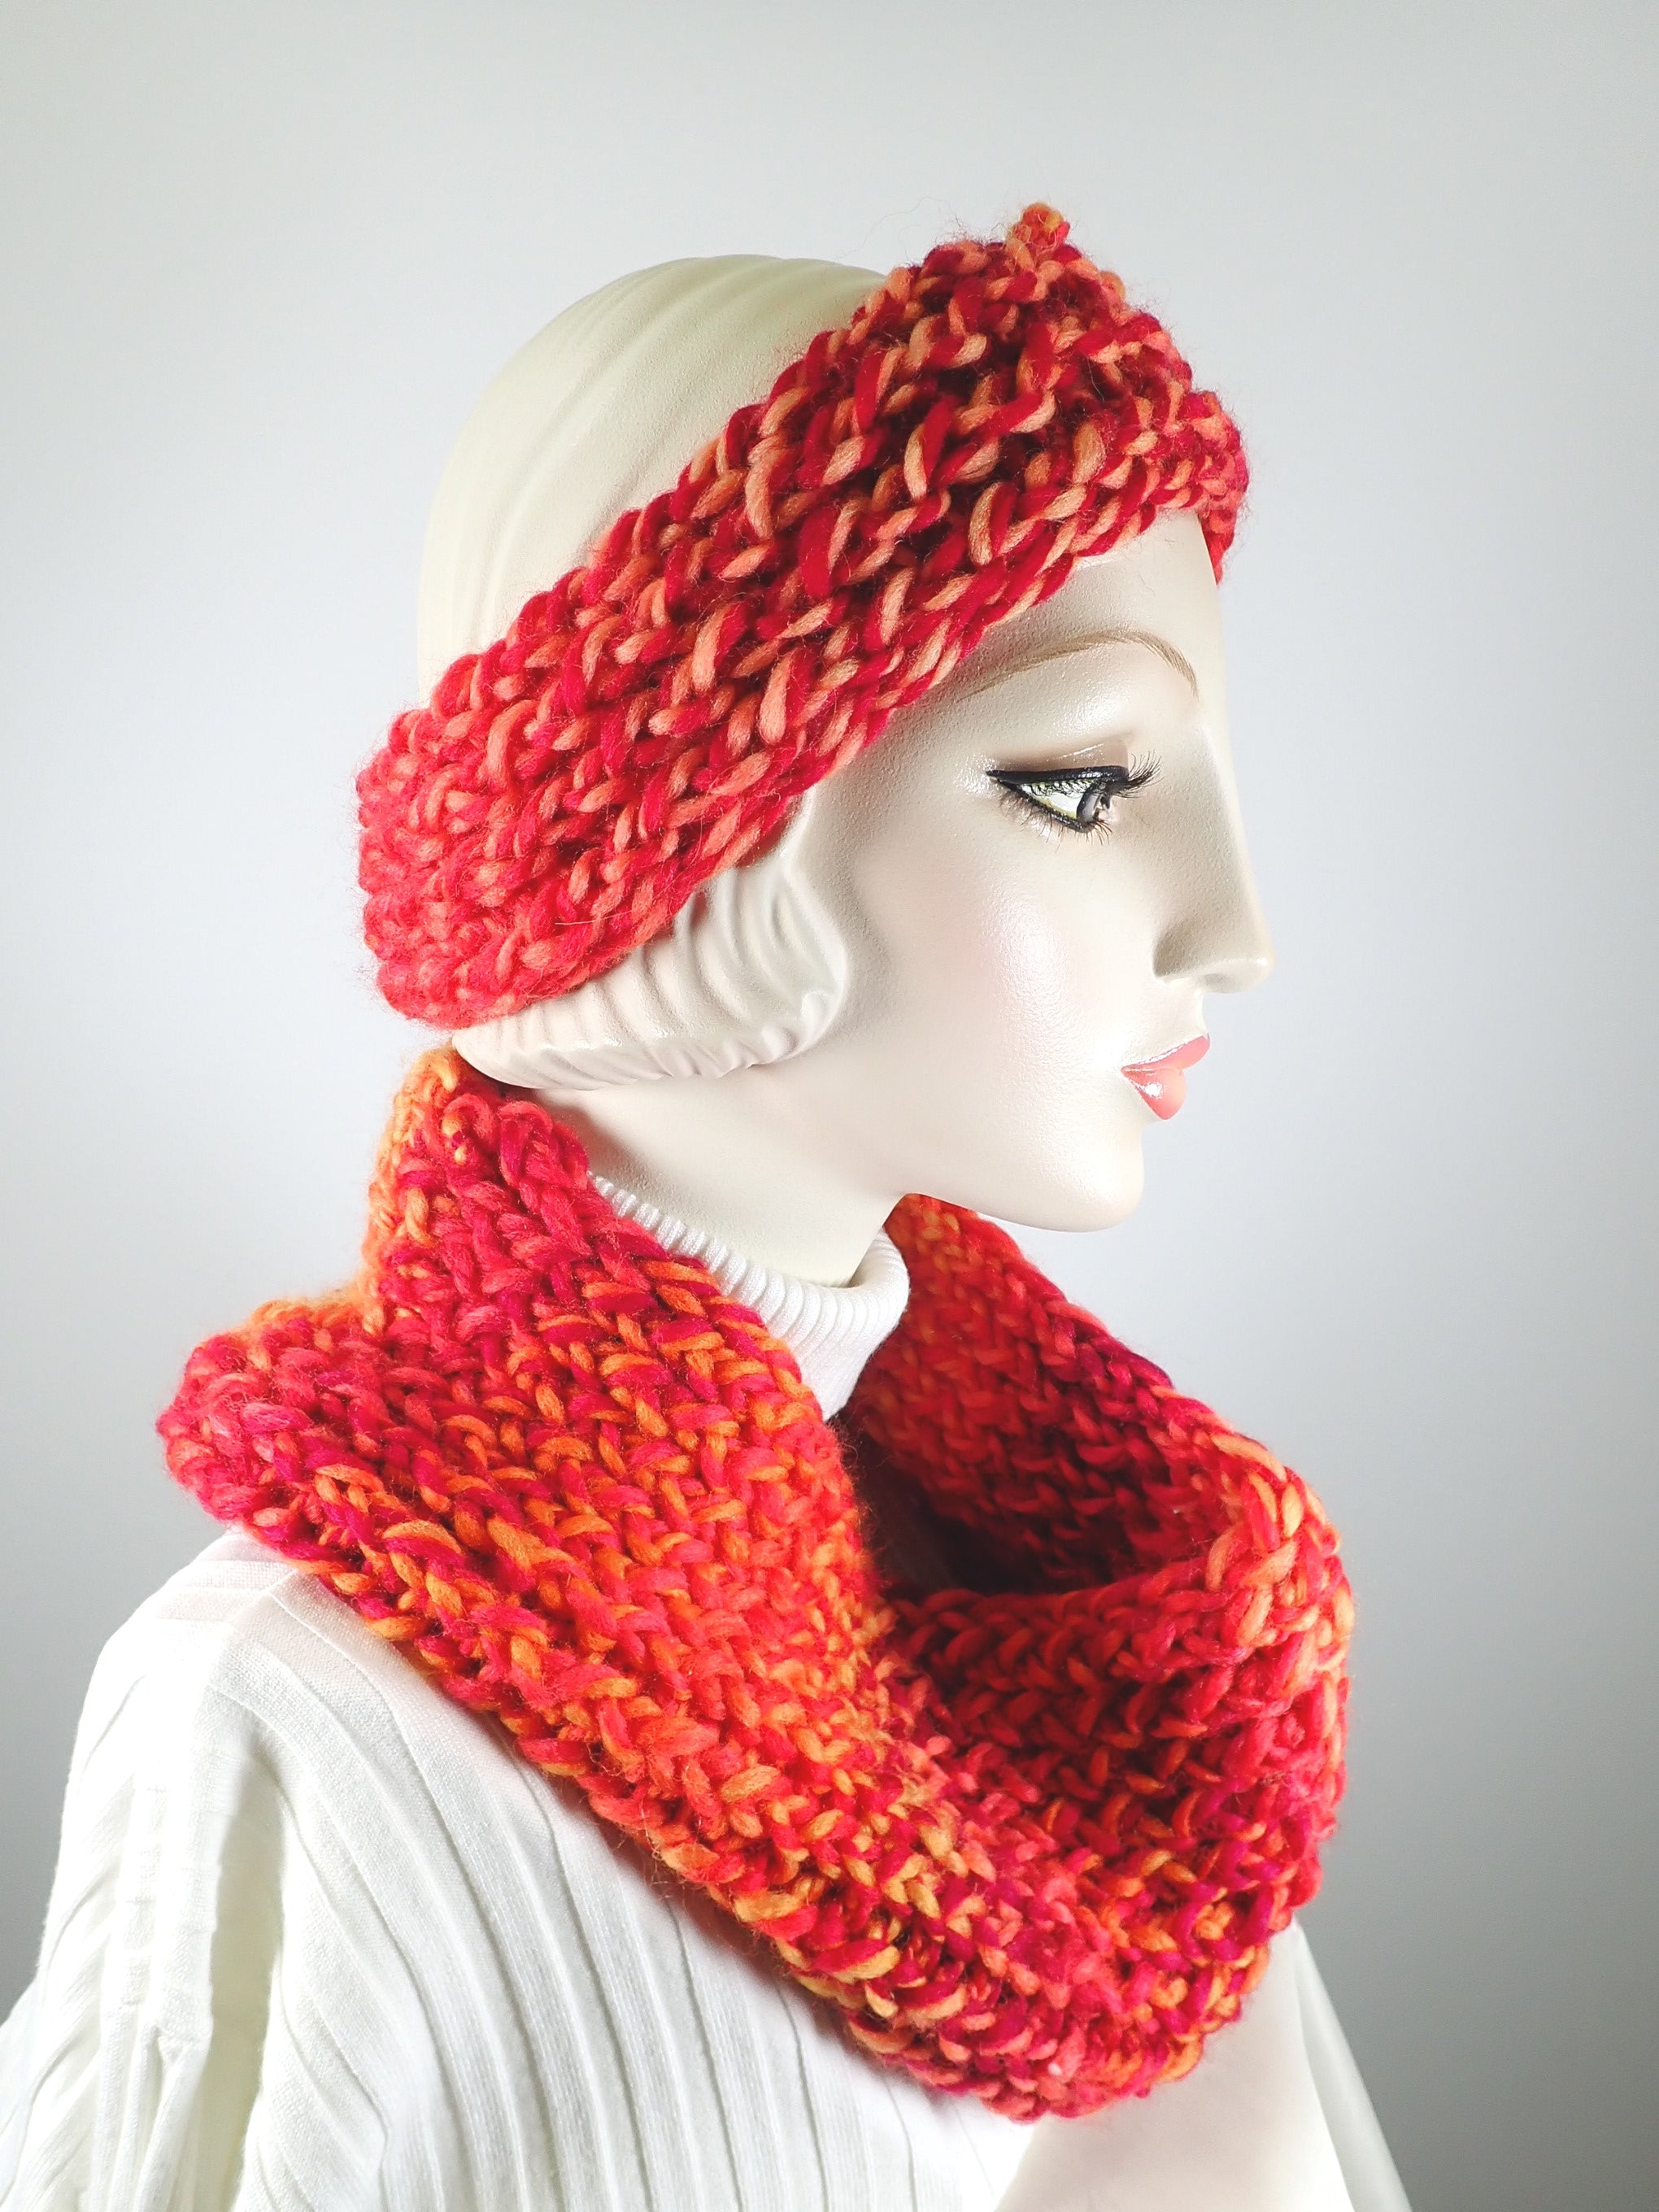 Gifts for her. Hand knitted vividly colored chunky headband and infinity scarf set